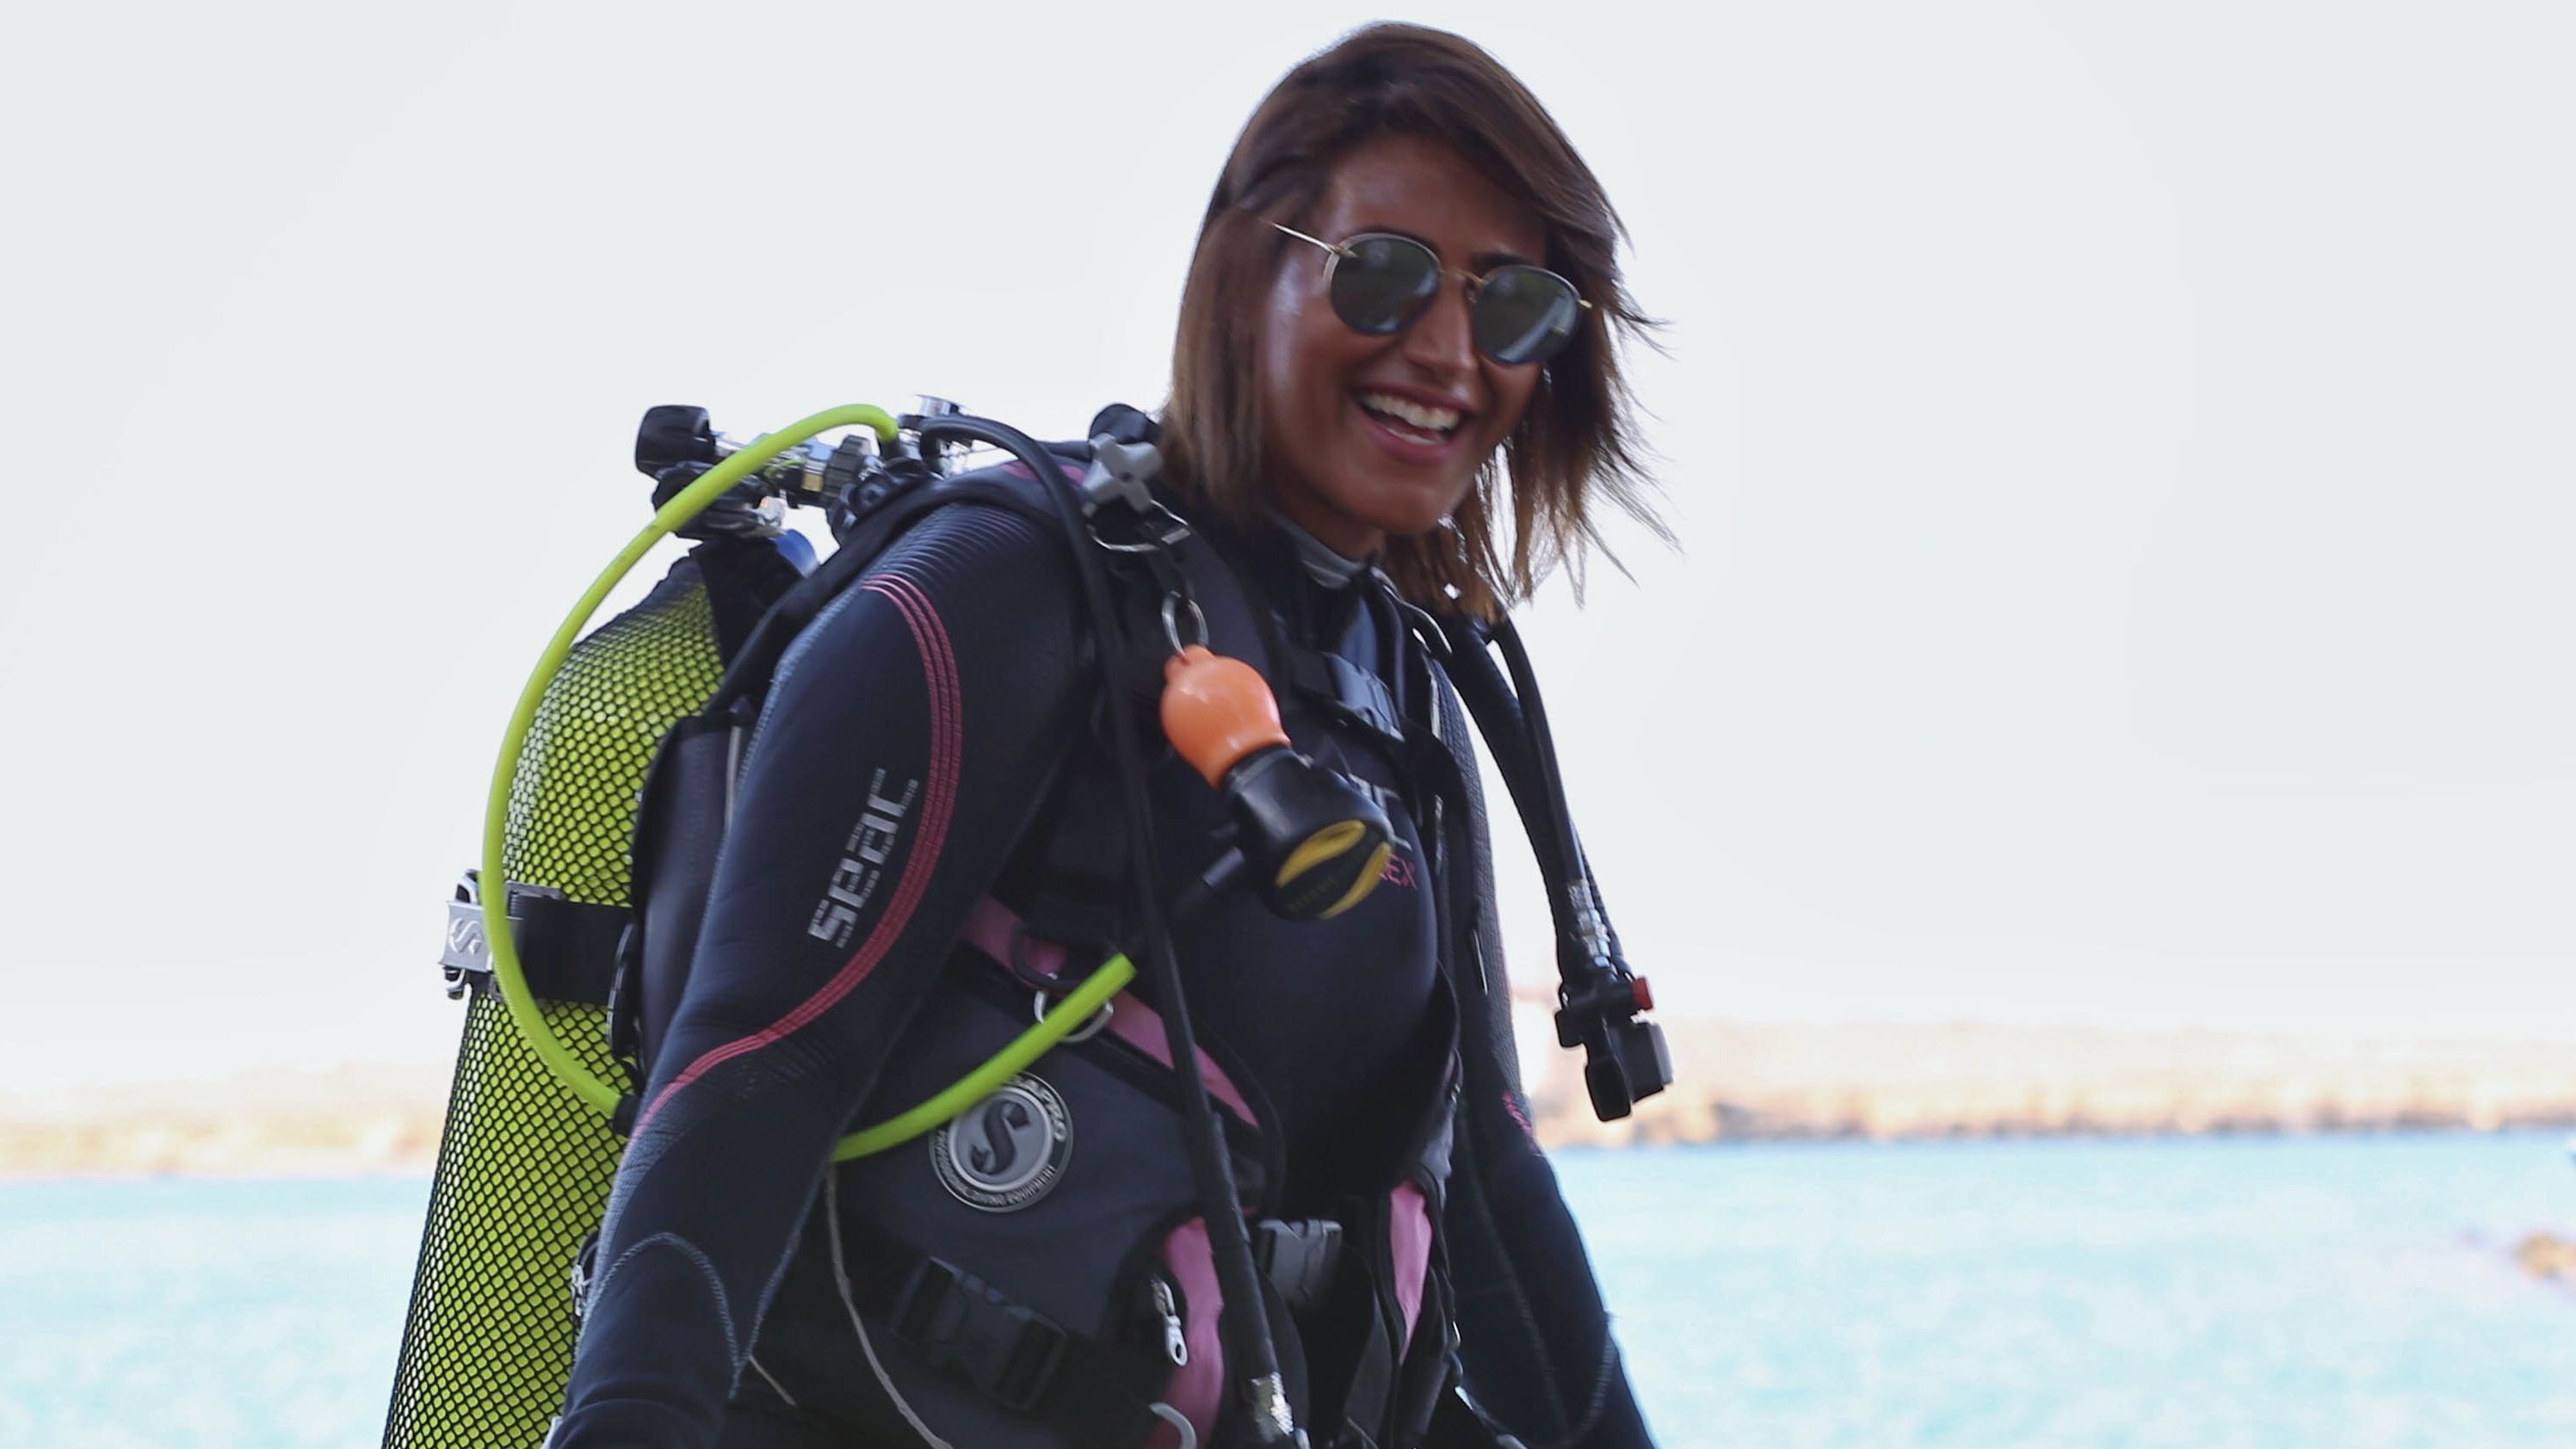 Nouf Alosaimi, a 29-year-old diving instructor based in Jeddah, is pictured in diving gear.